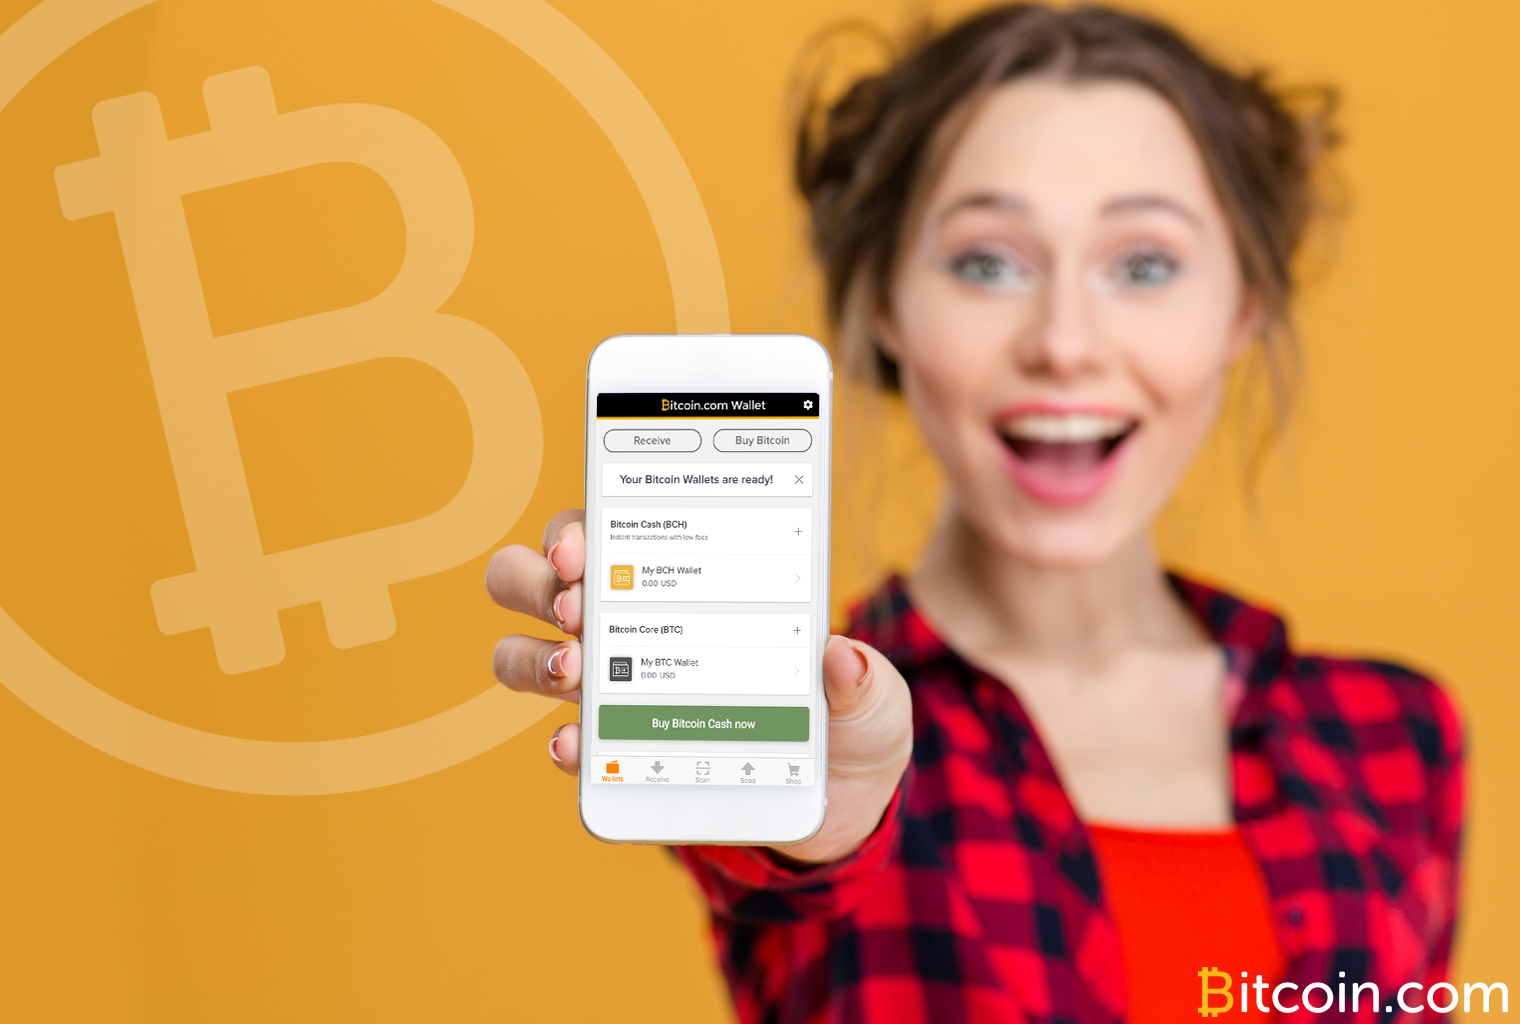 Uk And Europe Based Users Can Now Buy Bitcoin Cash Inside The Bitcoin Com Wallet Promoted Bitcoin News